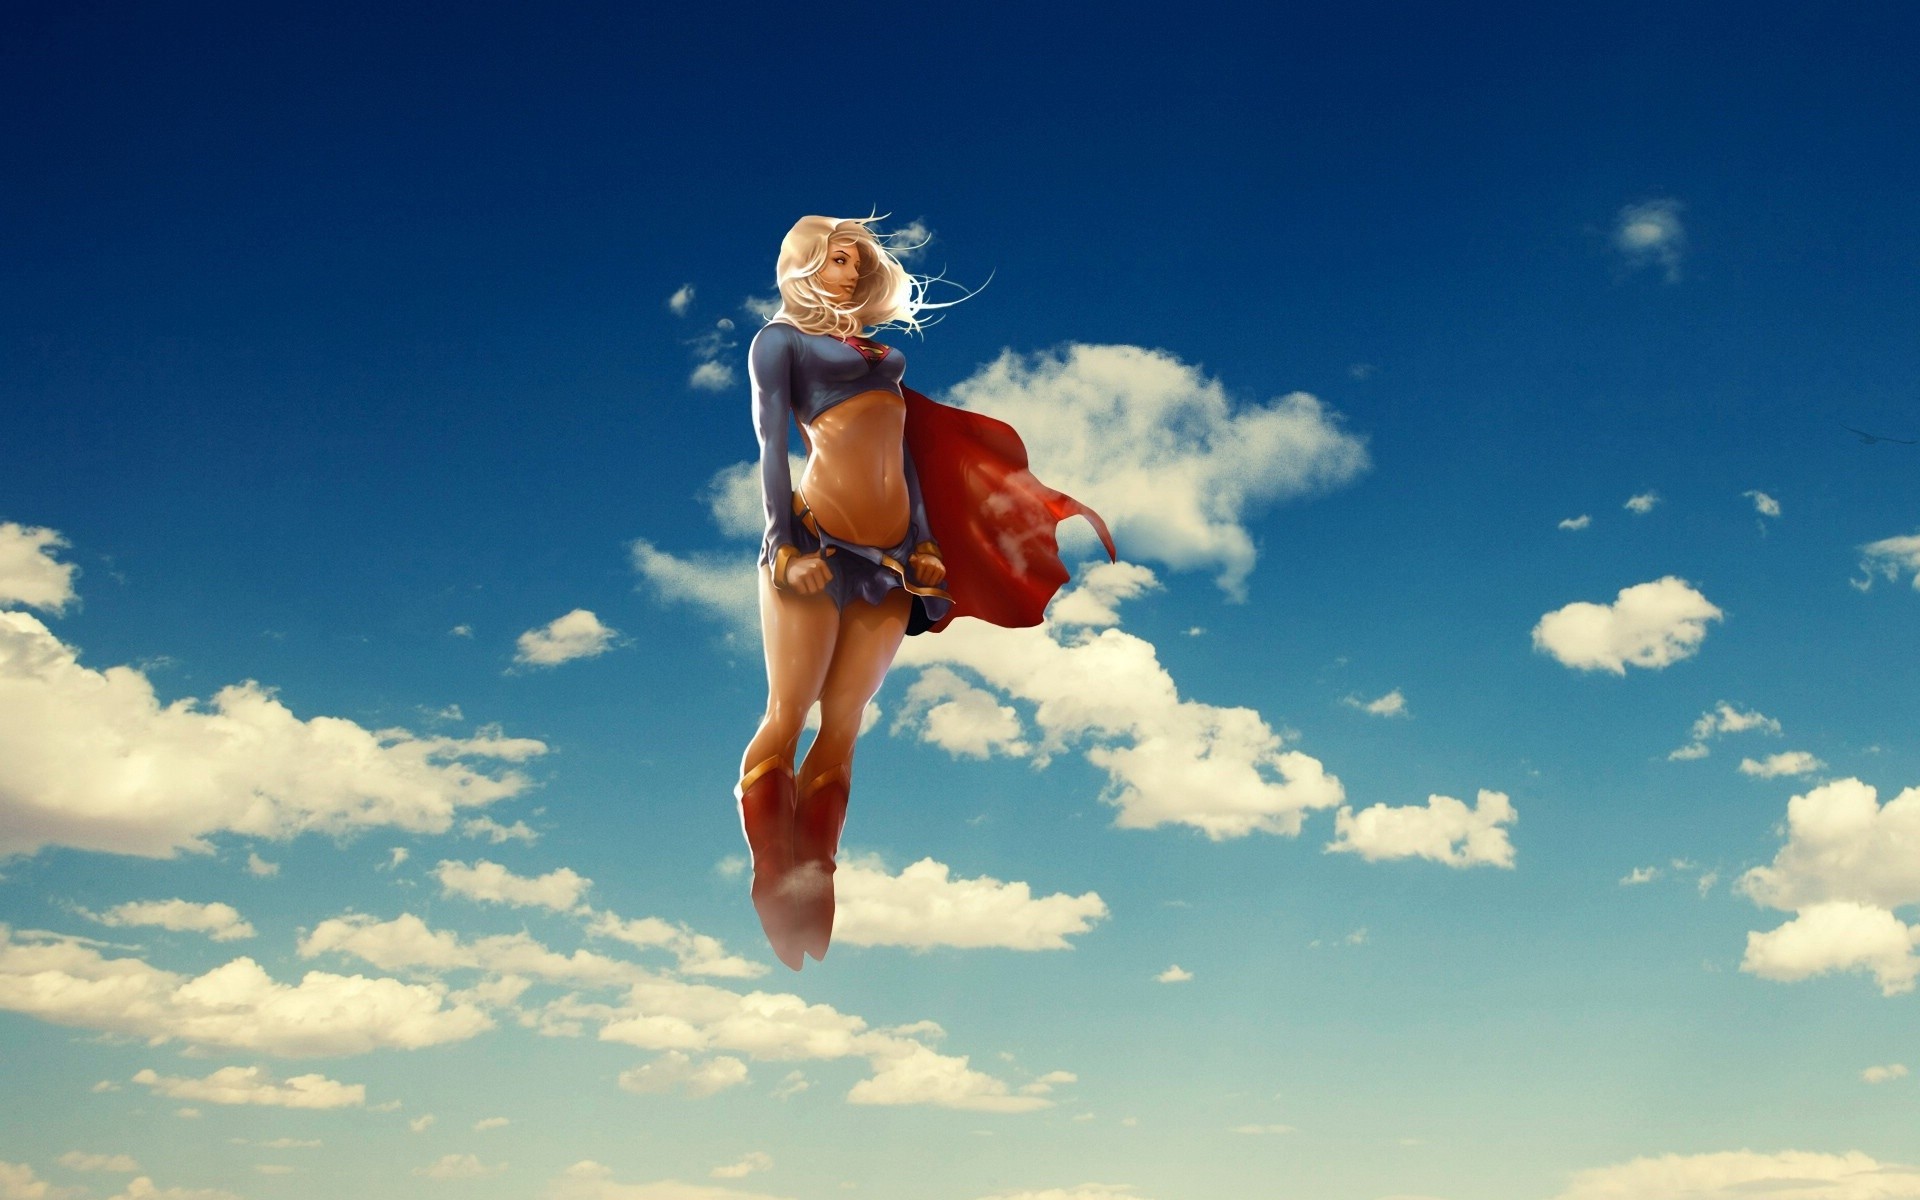 Wallpaper, sports, digital art, blonde, anime, sky, jumping, artwork, clouds, blue, flying, superhero, cape, DC Comics, superheroines, Supergirl, Superwoman, cloud, hand, atmosphere of earth, human action, extreme sport, physical exercise, parachuting